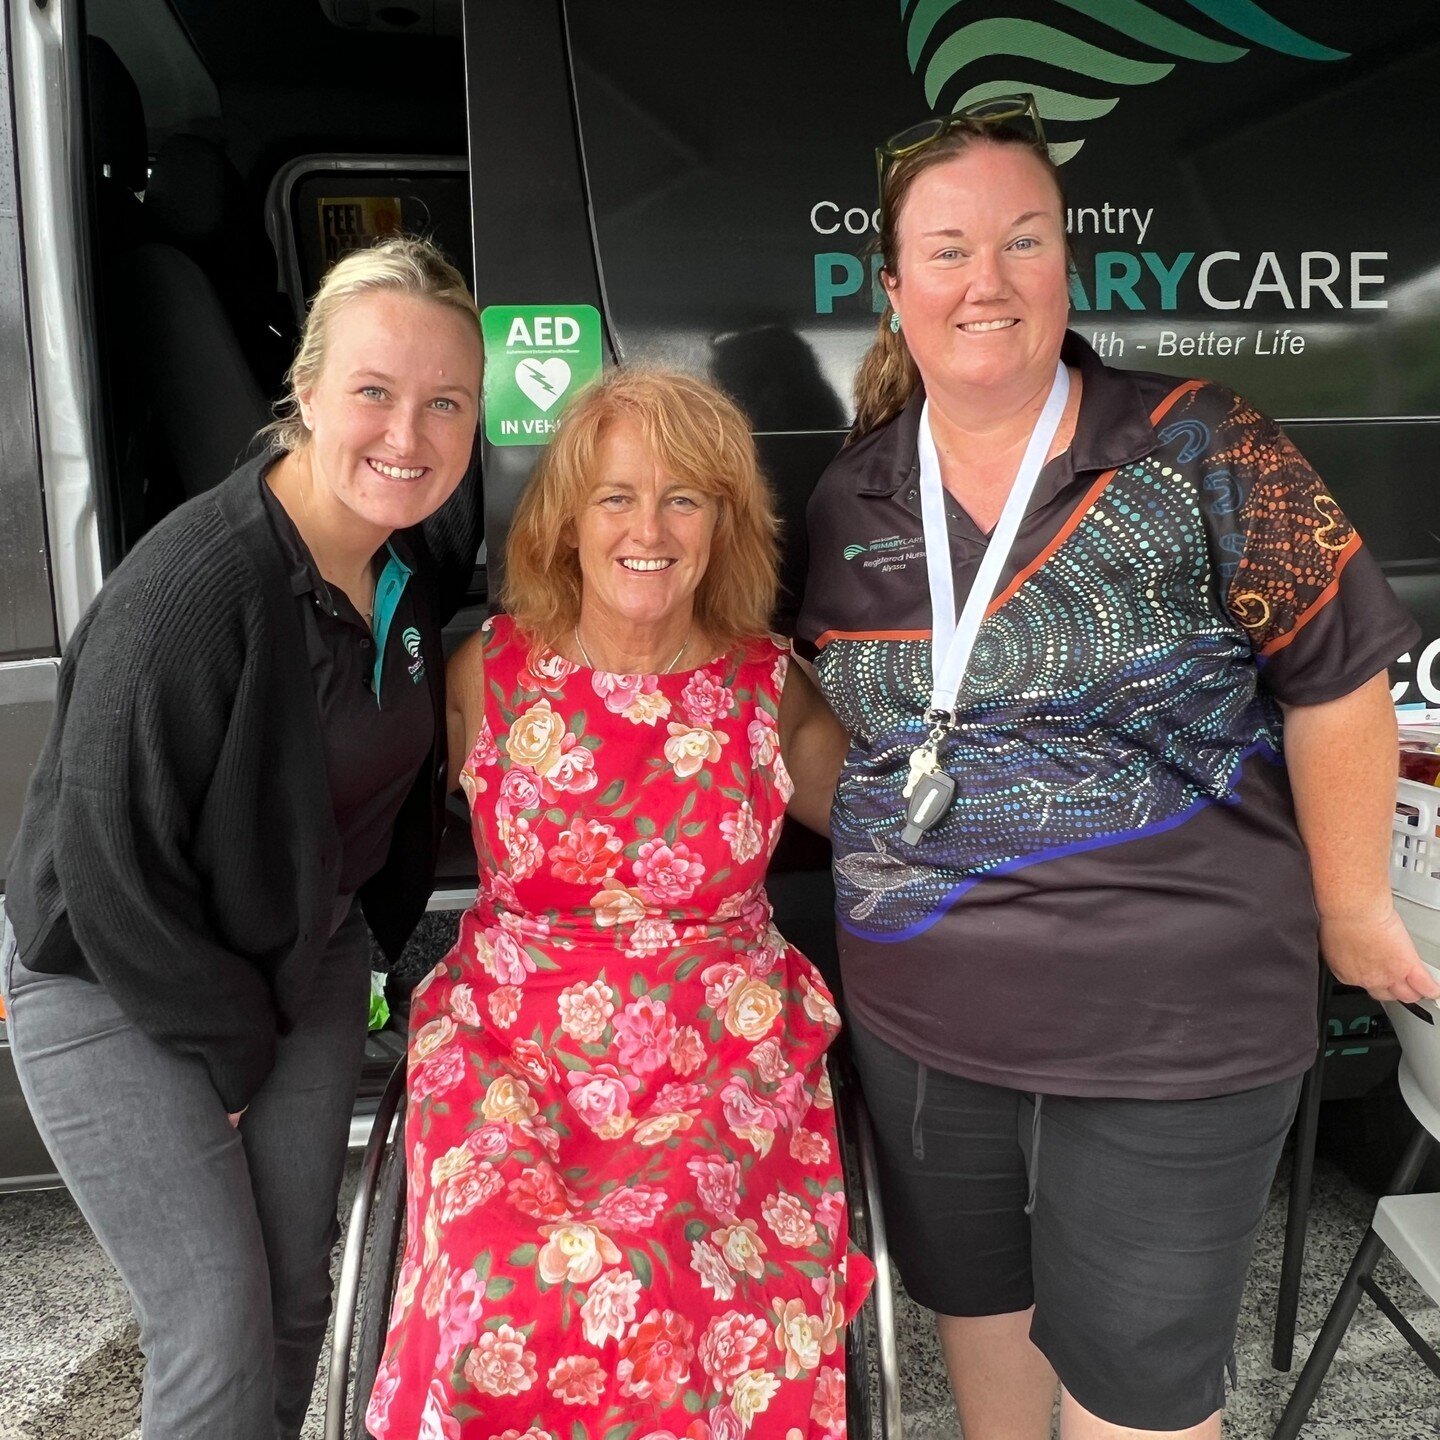 Thank you so much for stopping by for a chat with us @liesltesch. It was so great to share the @healthonthestreets_van love with you &hearts;

#centralcoastcharity #lovecentralcoast #centralcoastnsw #centralcoasthomelessoutreach #homelessoutreach #wo